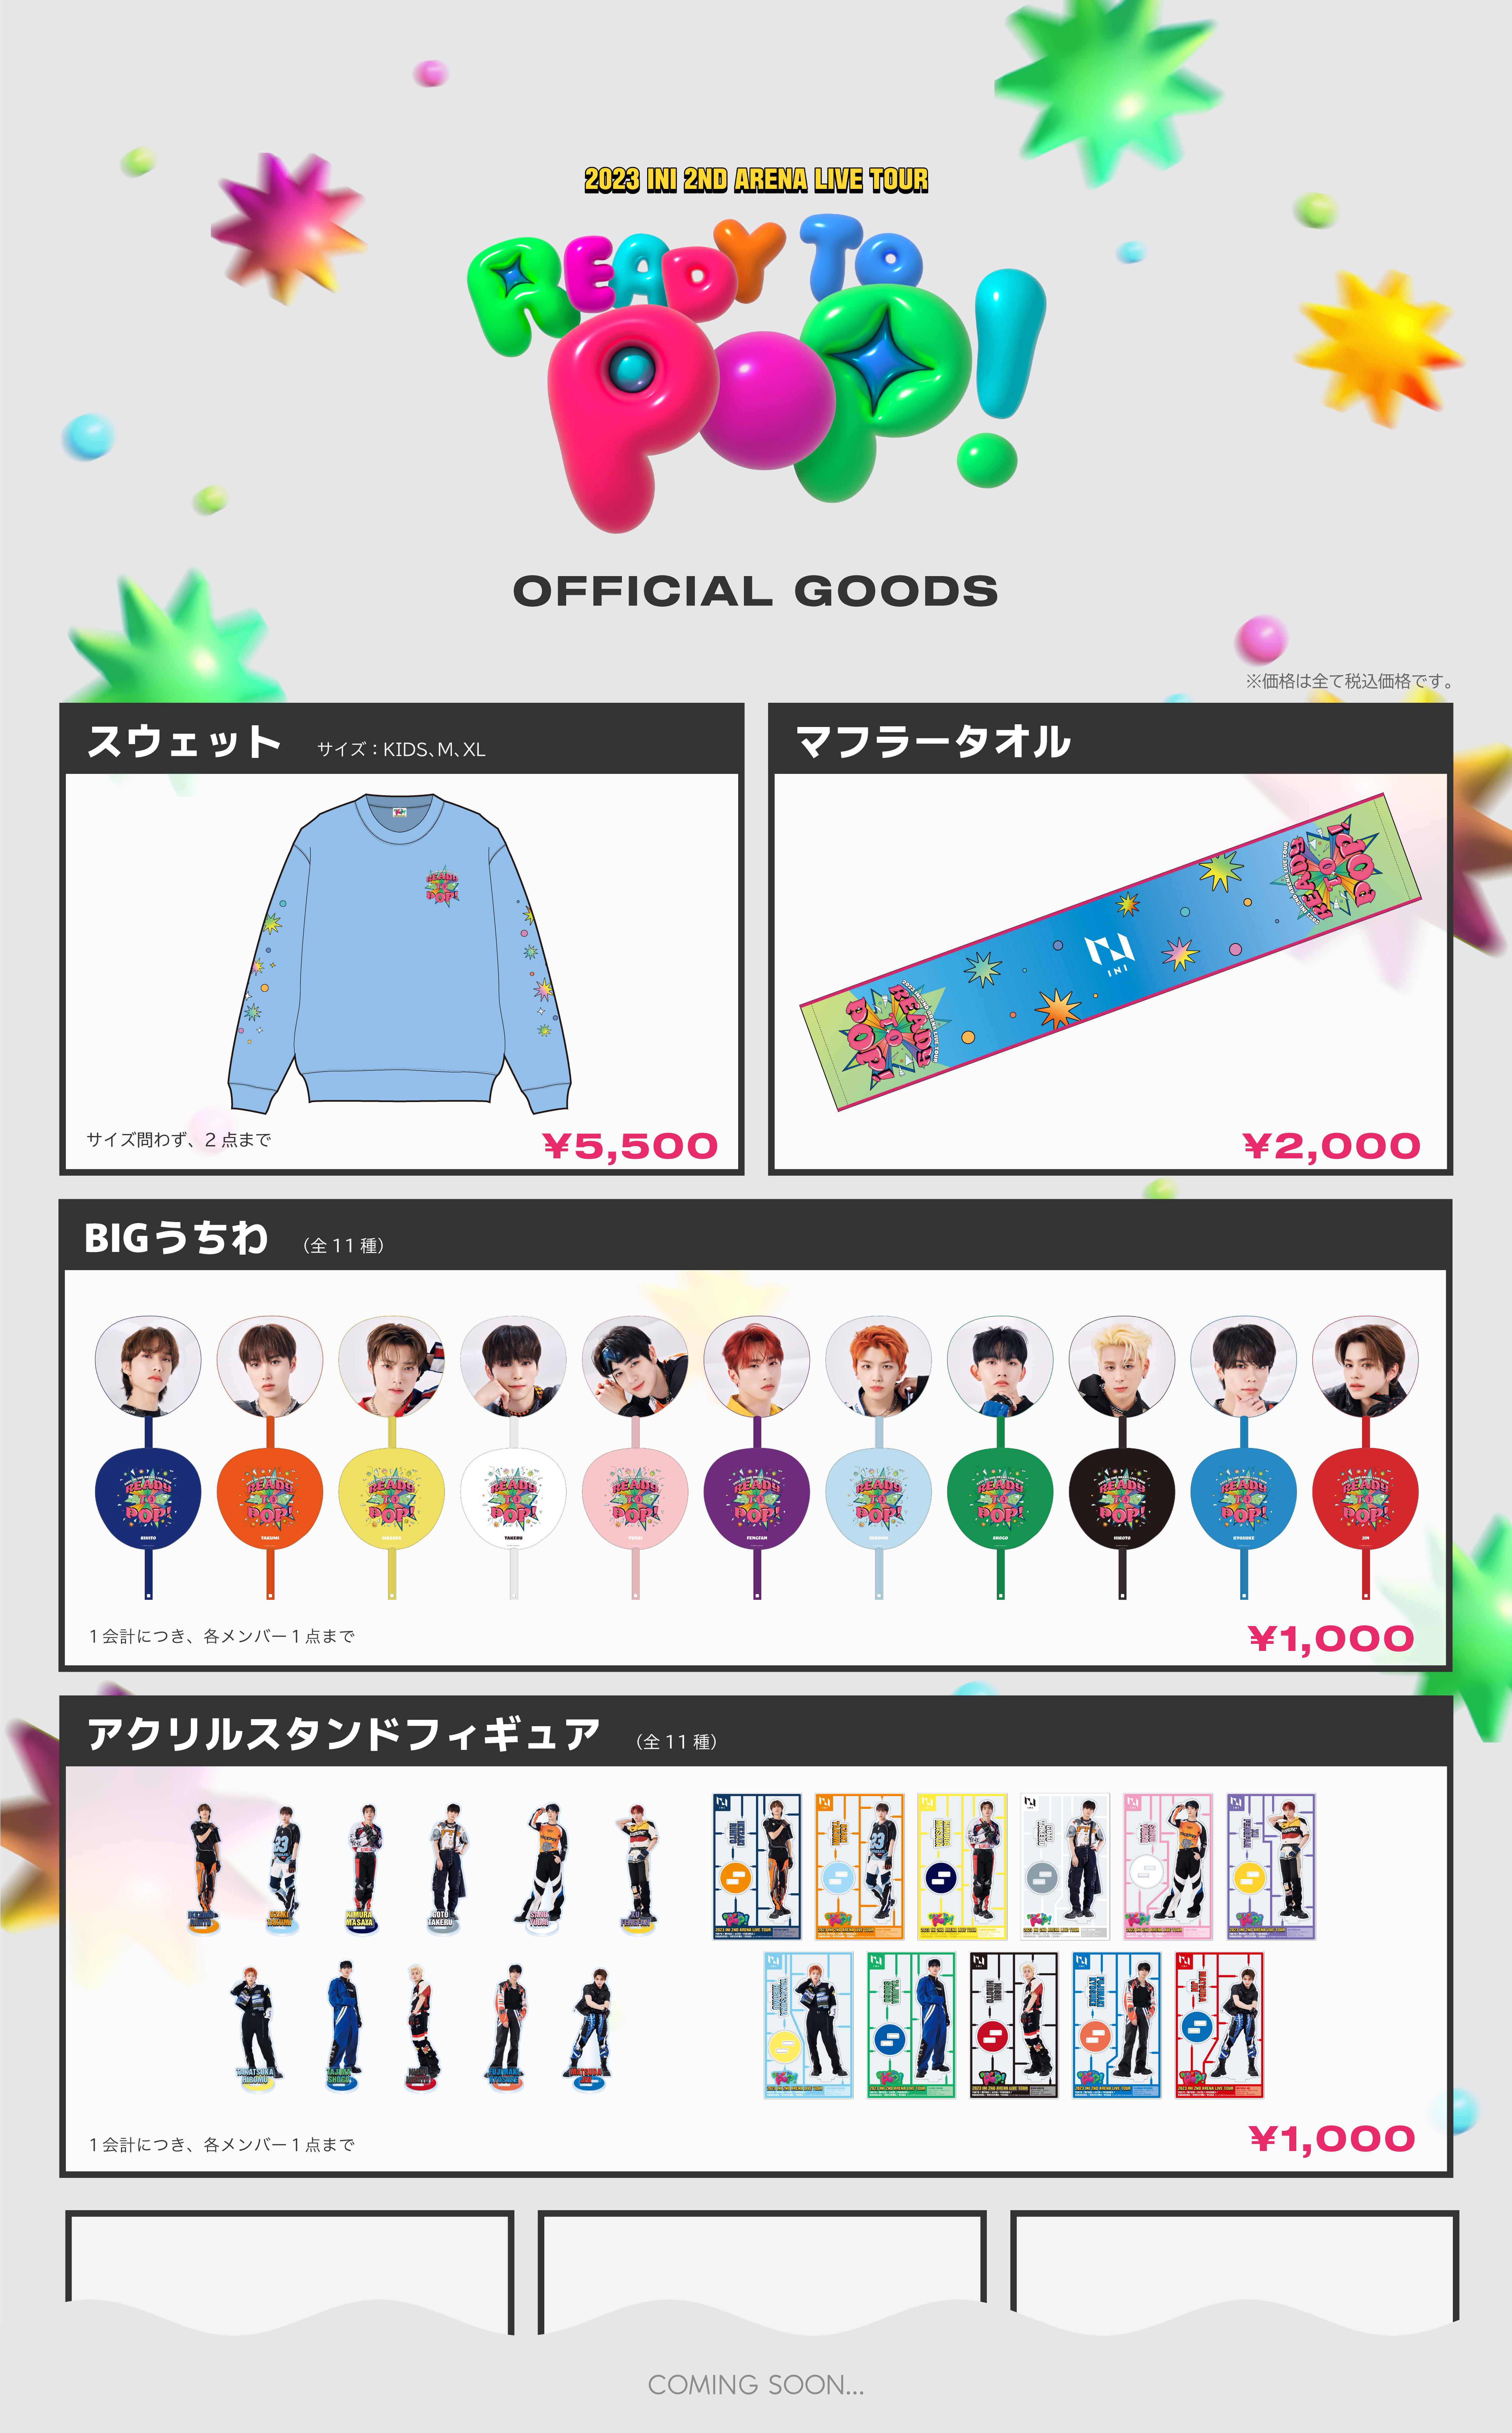 2023 INI 2ND ARENA LIVE TOUR [READY TO POP!] 」OFFICIAL GOODS 事前